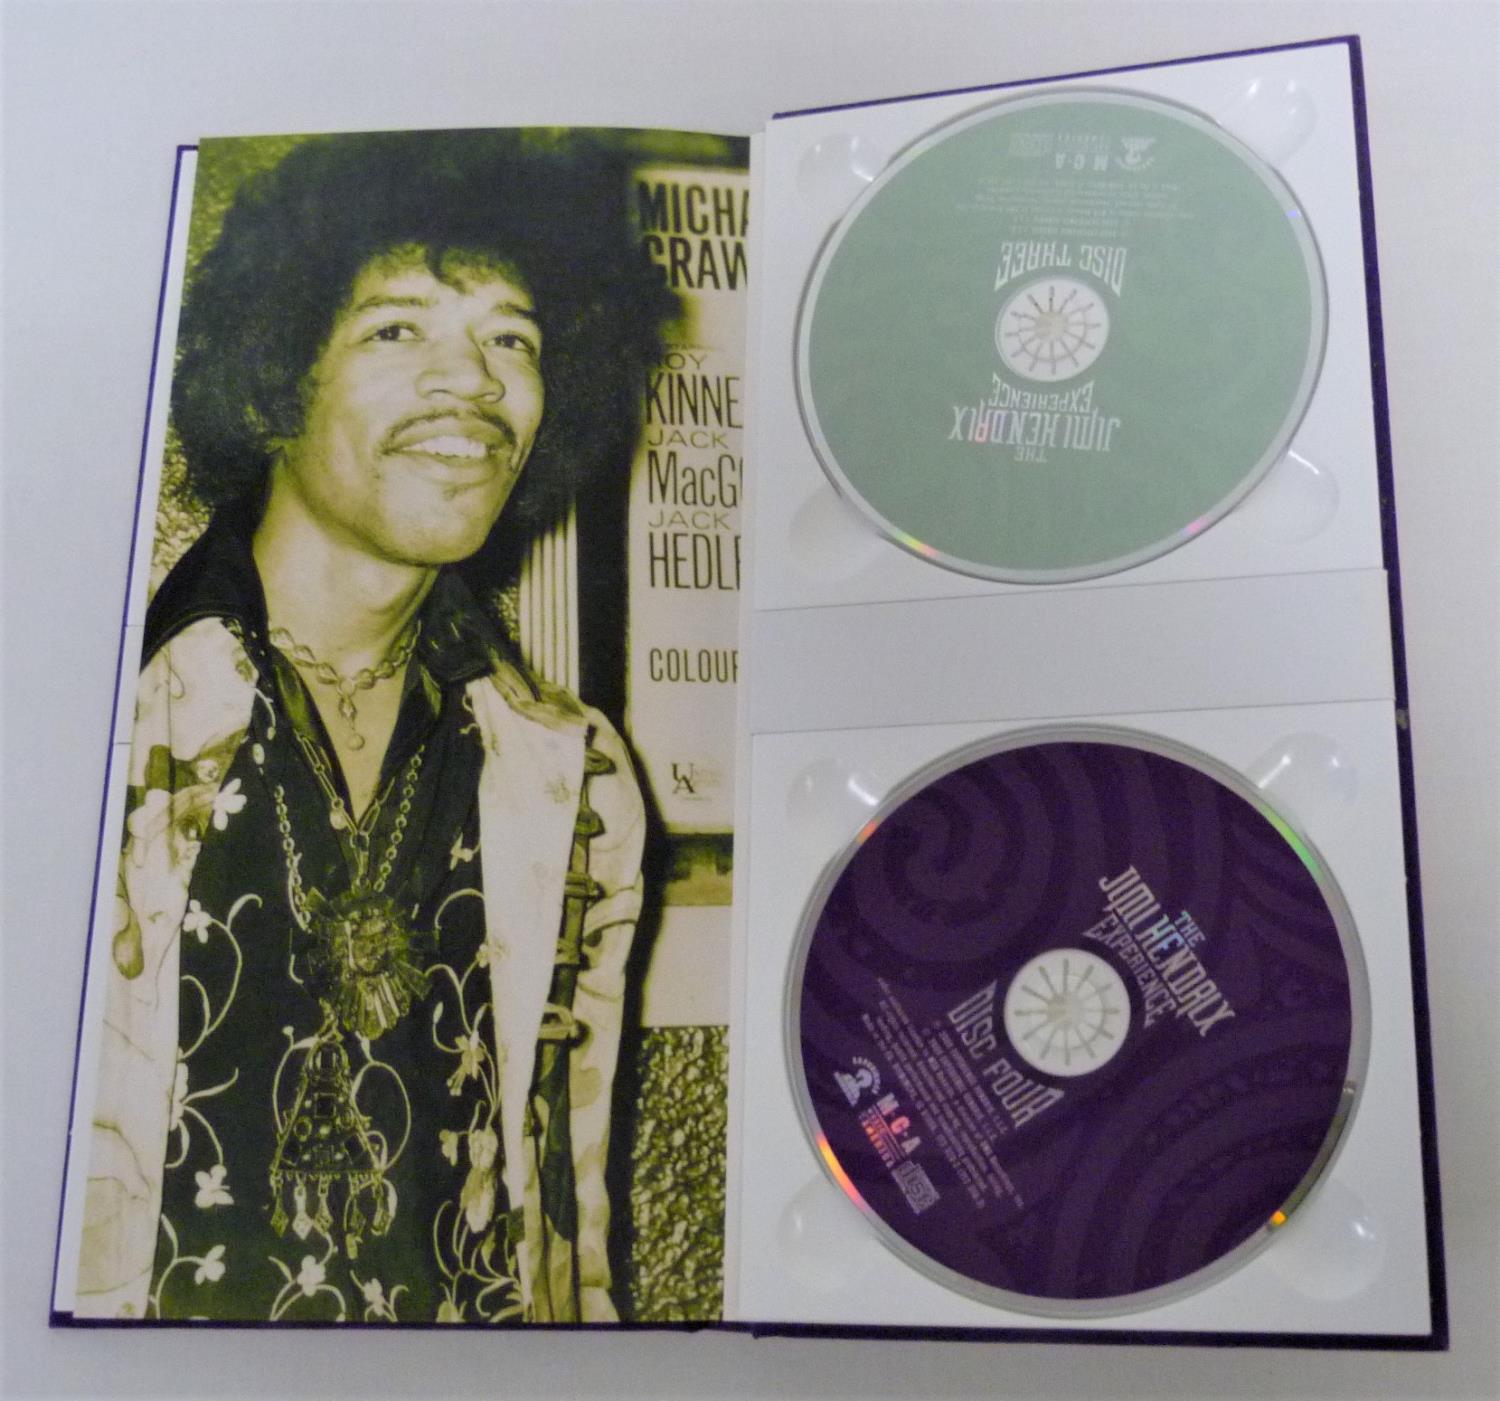 The Jimi Hendrix Experience, 4 CD set in purple velvet sleeve. Manufactured in 2000, made in the EU.